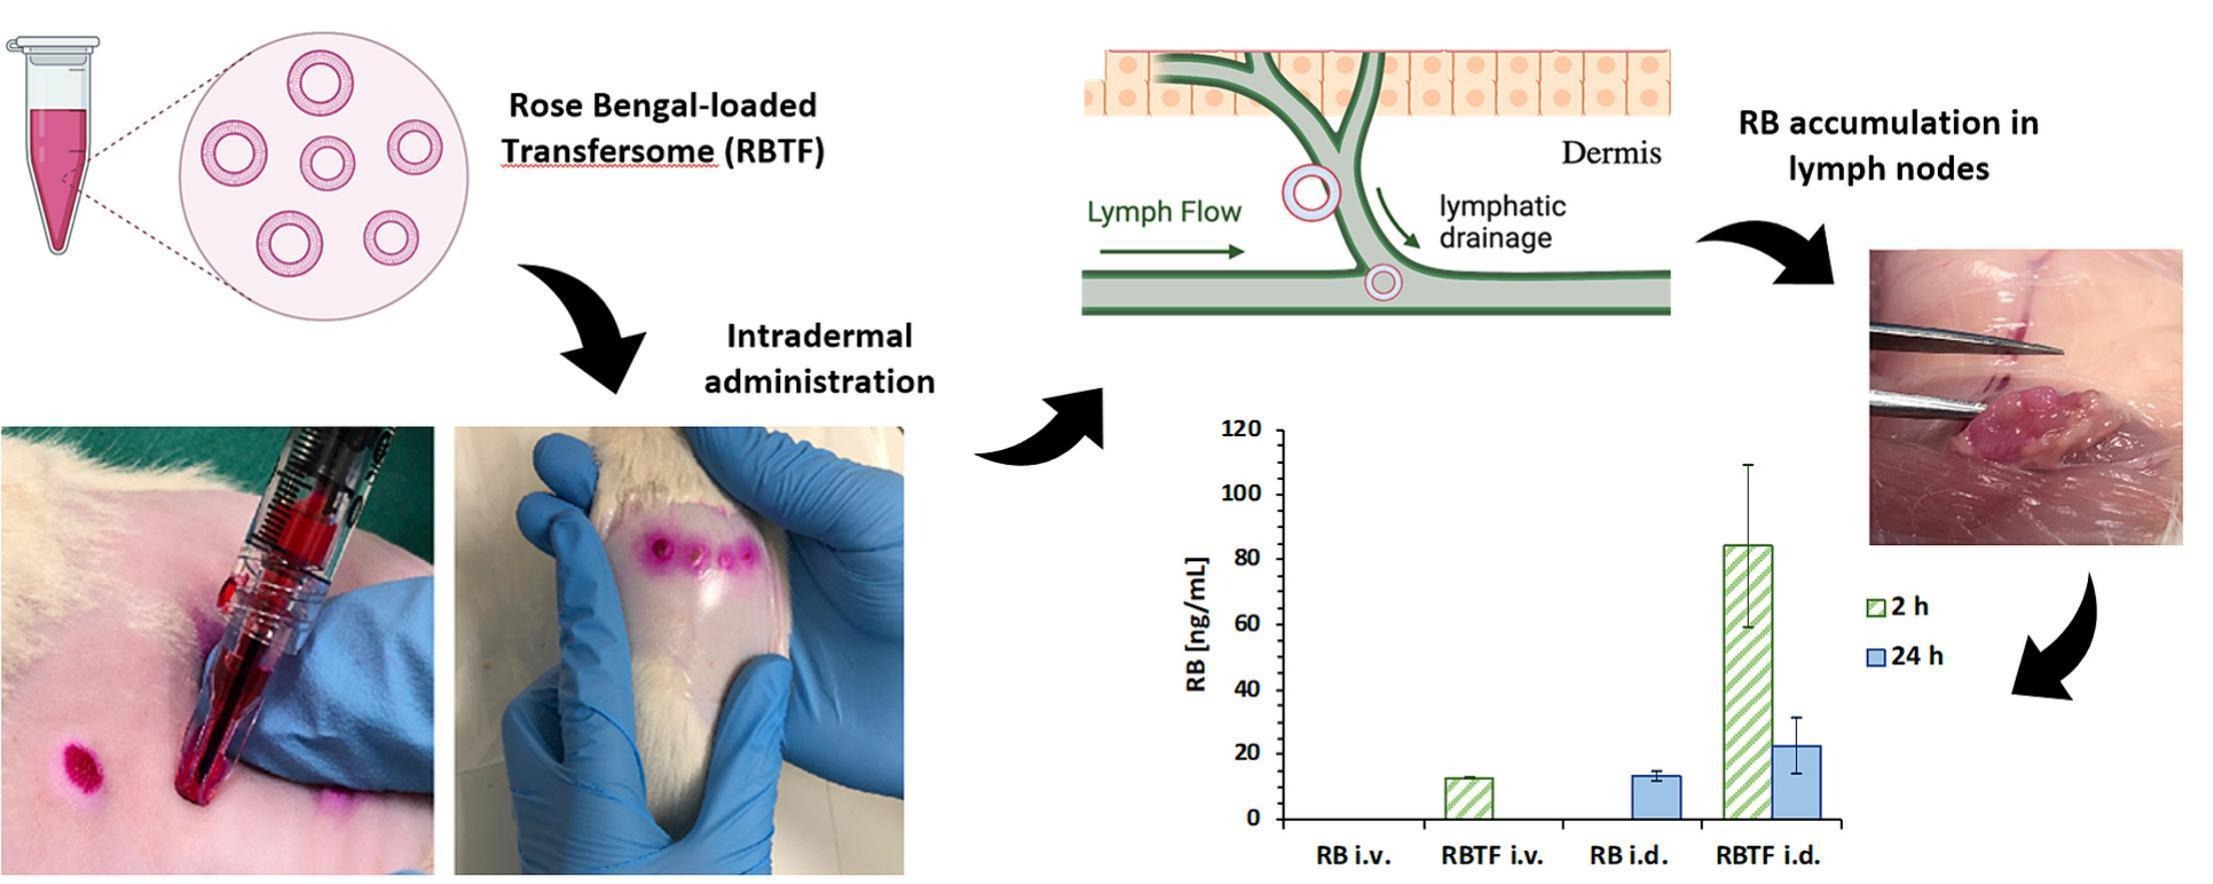 Improved pharmacokinetic and lymphatic uptake of Rose Bengal after transfersome intradermal deposition using hollow microneedles